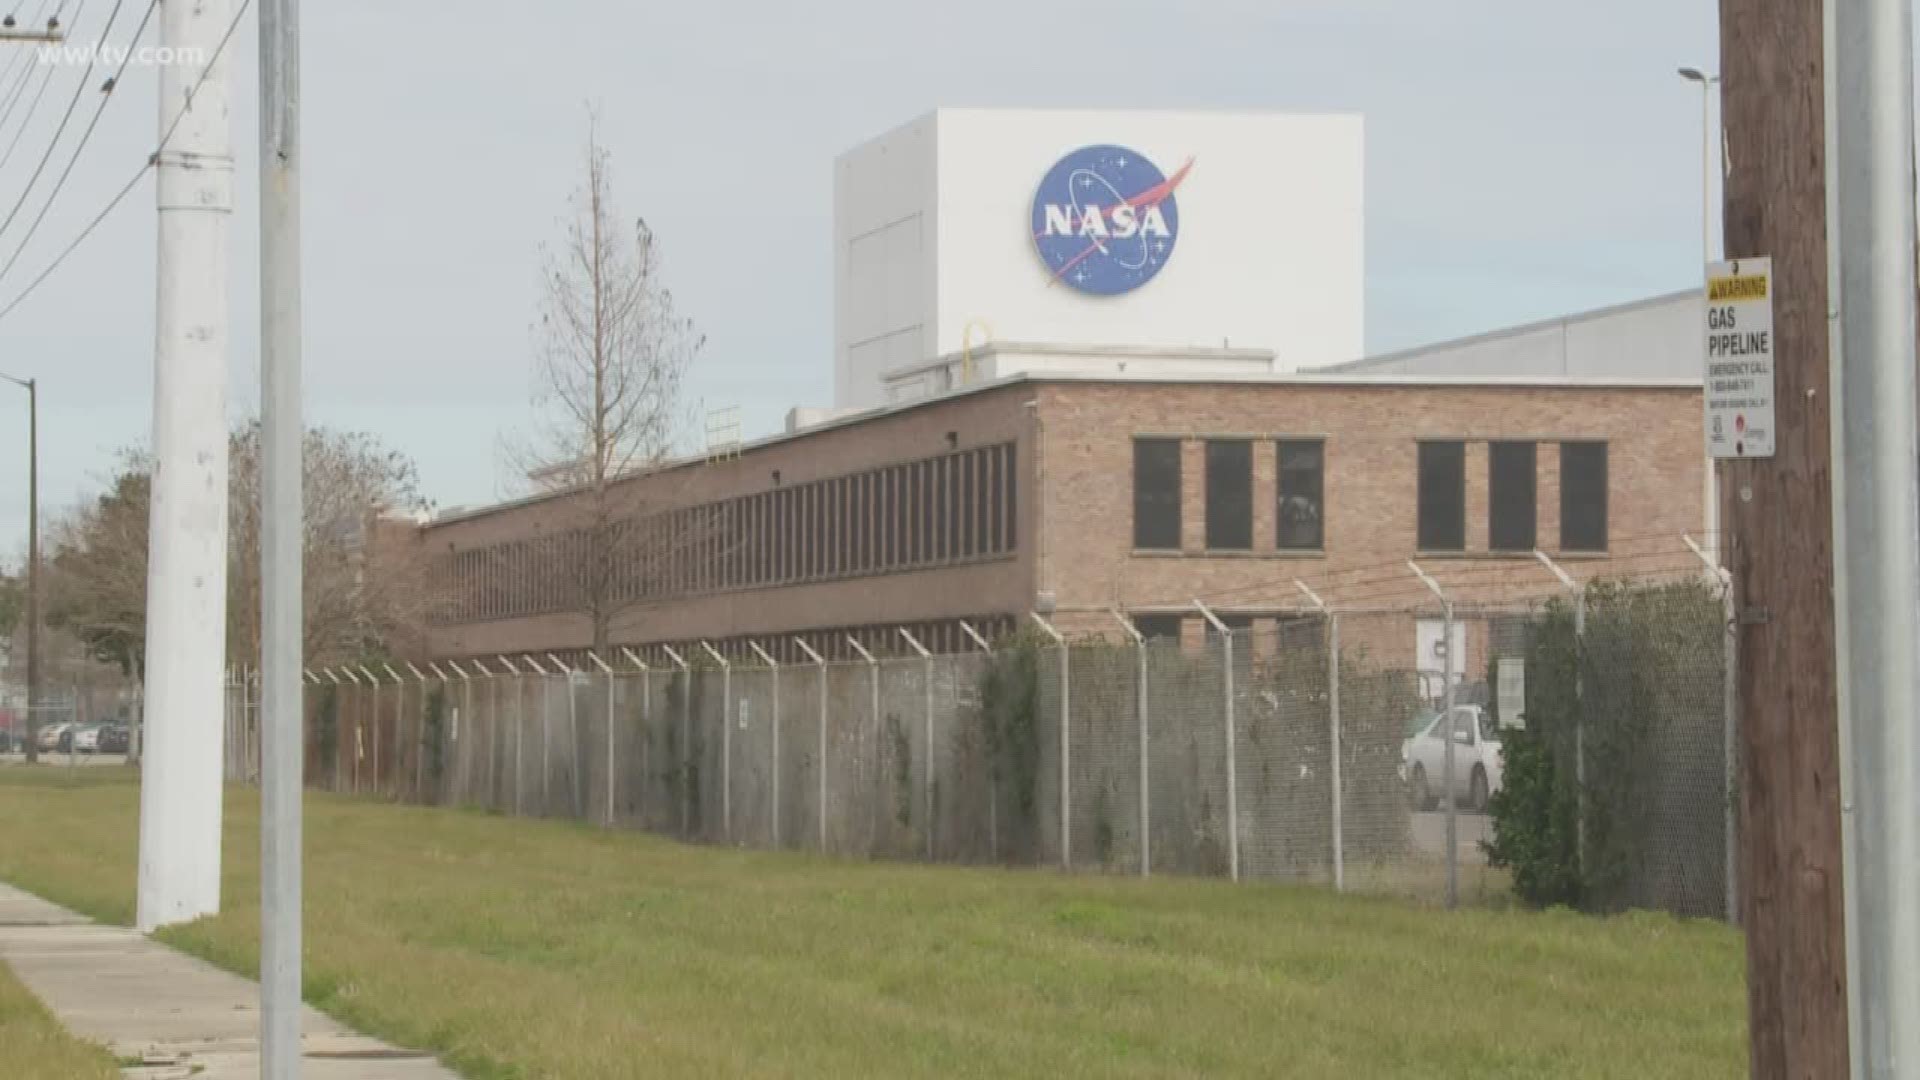 Businesses near the Michoud facility in New Orleans East feel the hit after business slows